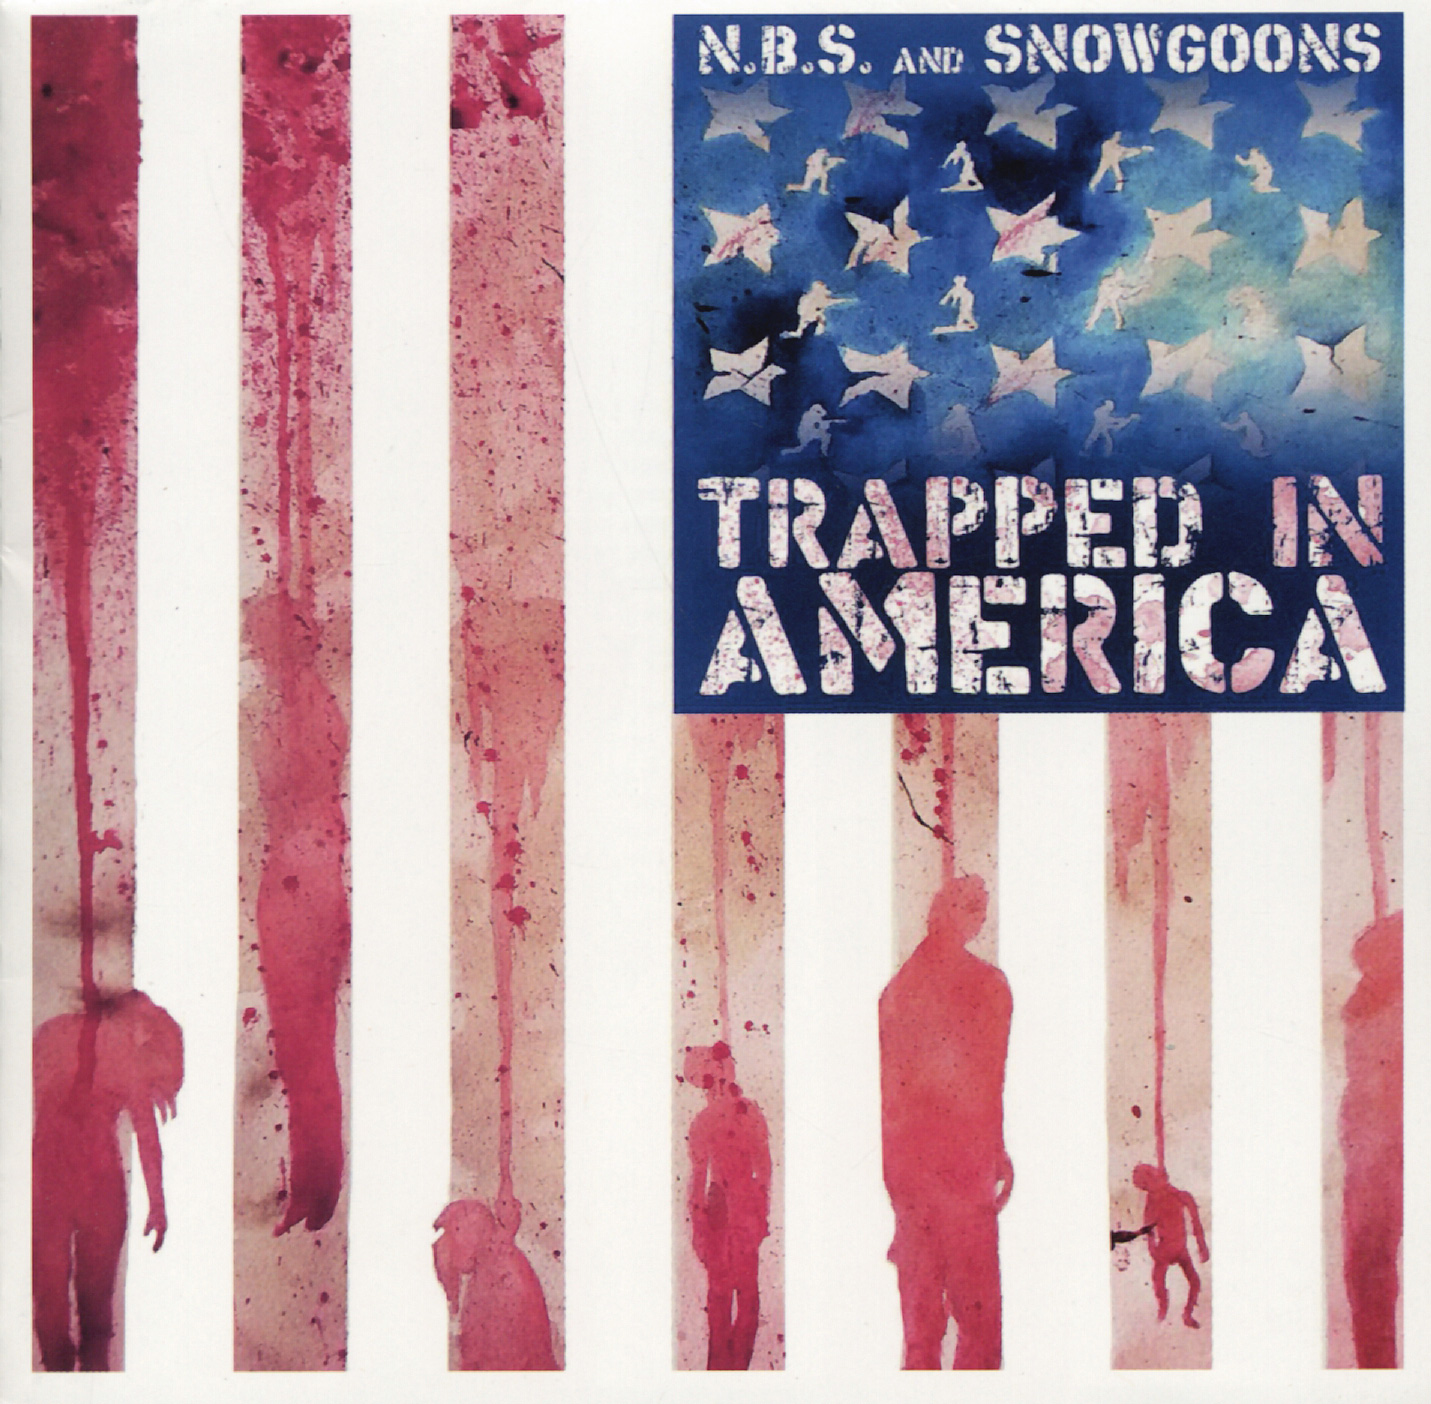 Trapped_in_america